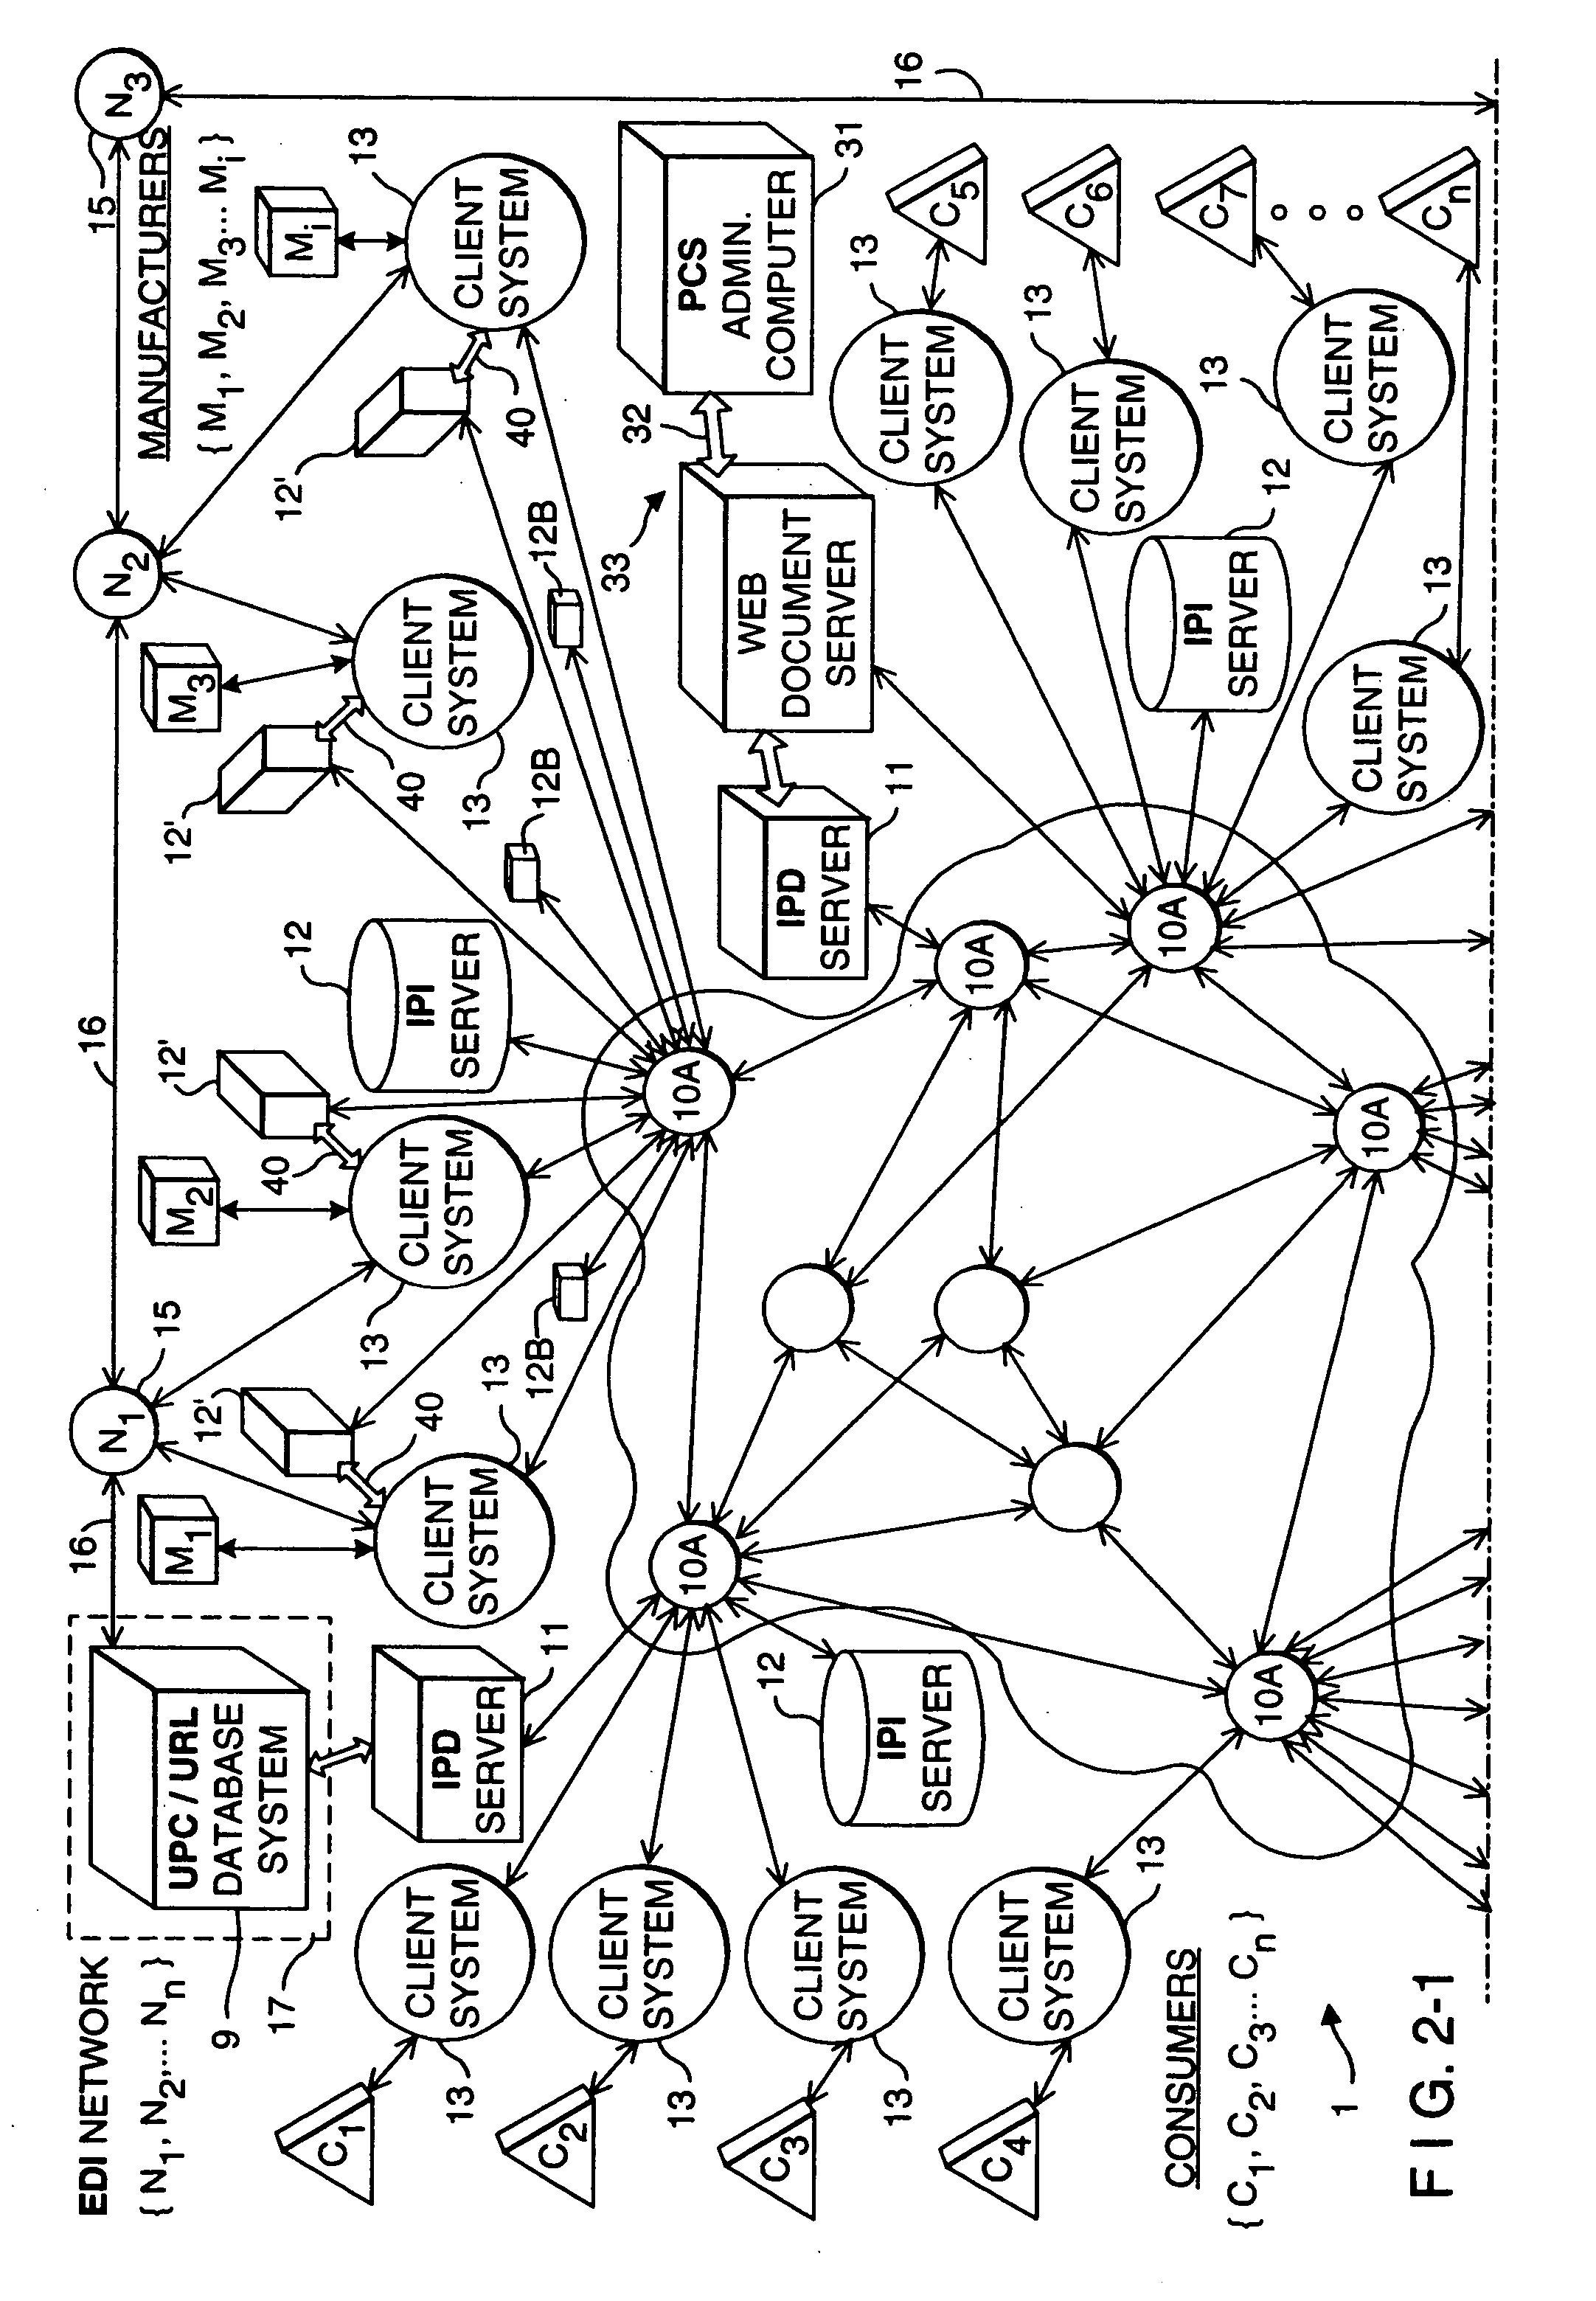 Method of and system for accessing consumer product related information at points of consumer presence on the World Wide Web(WWW) at which UPN-encoded java-applets are embedded within HTML-encoded documents